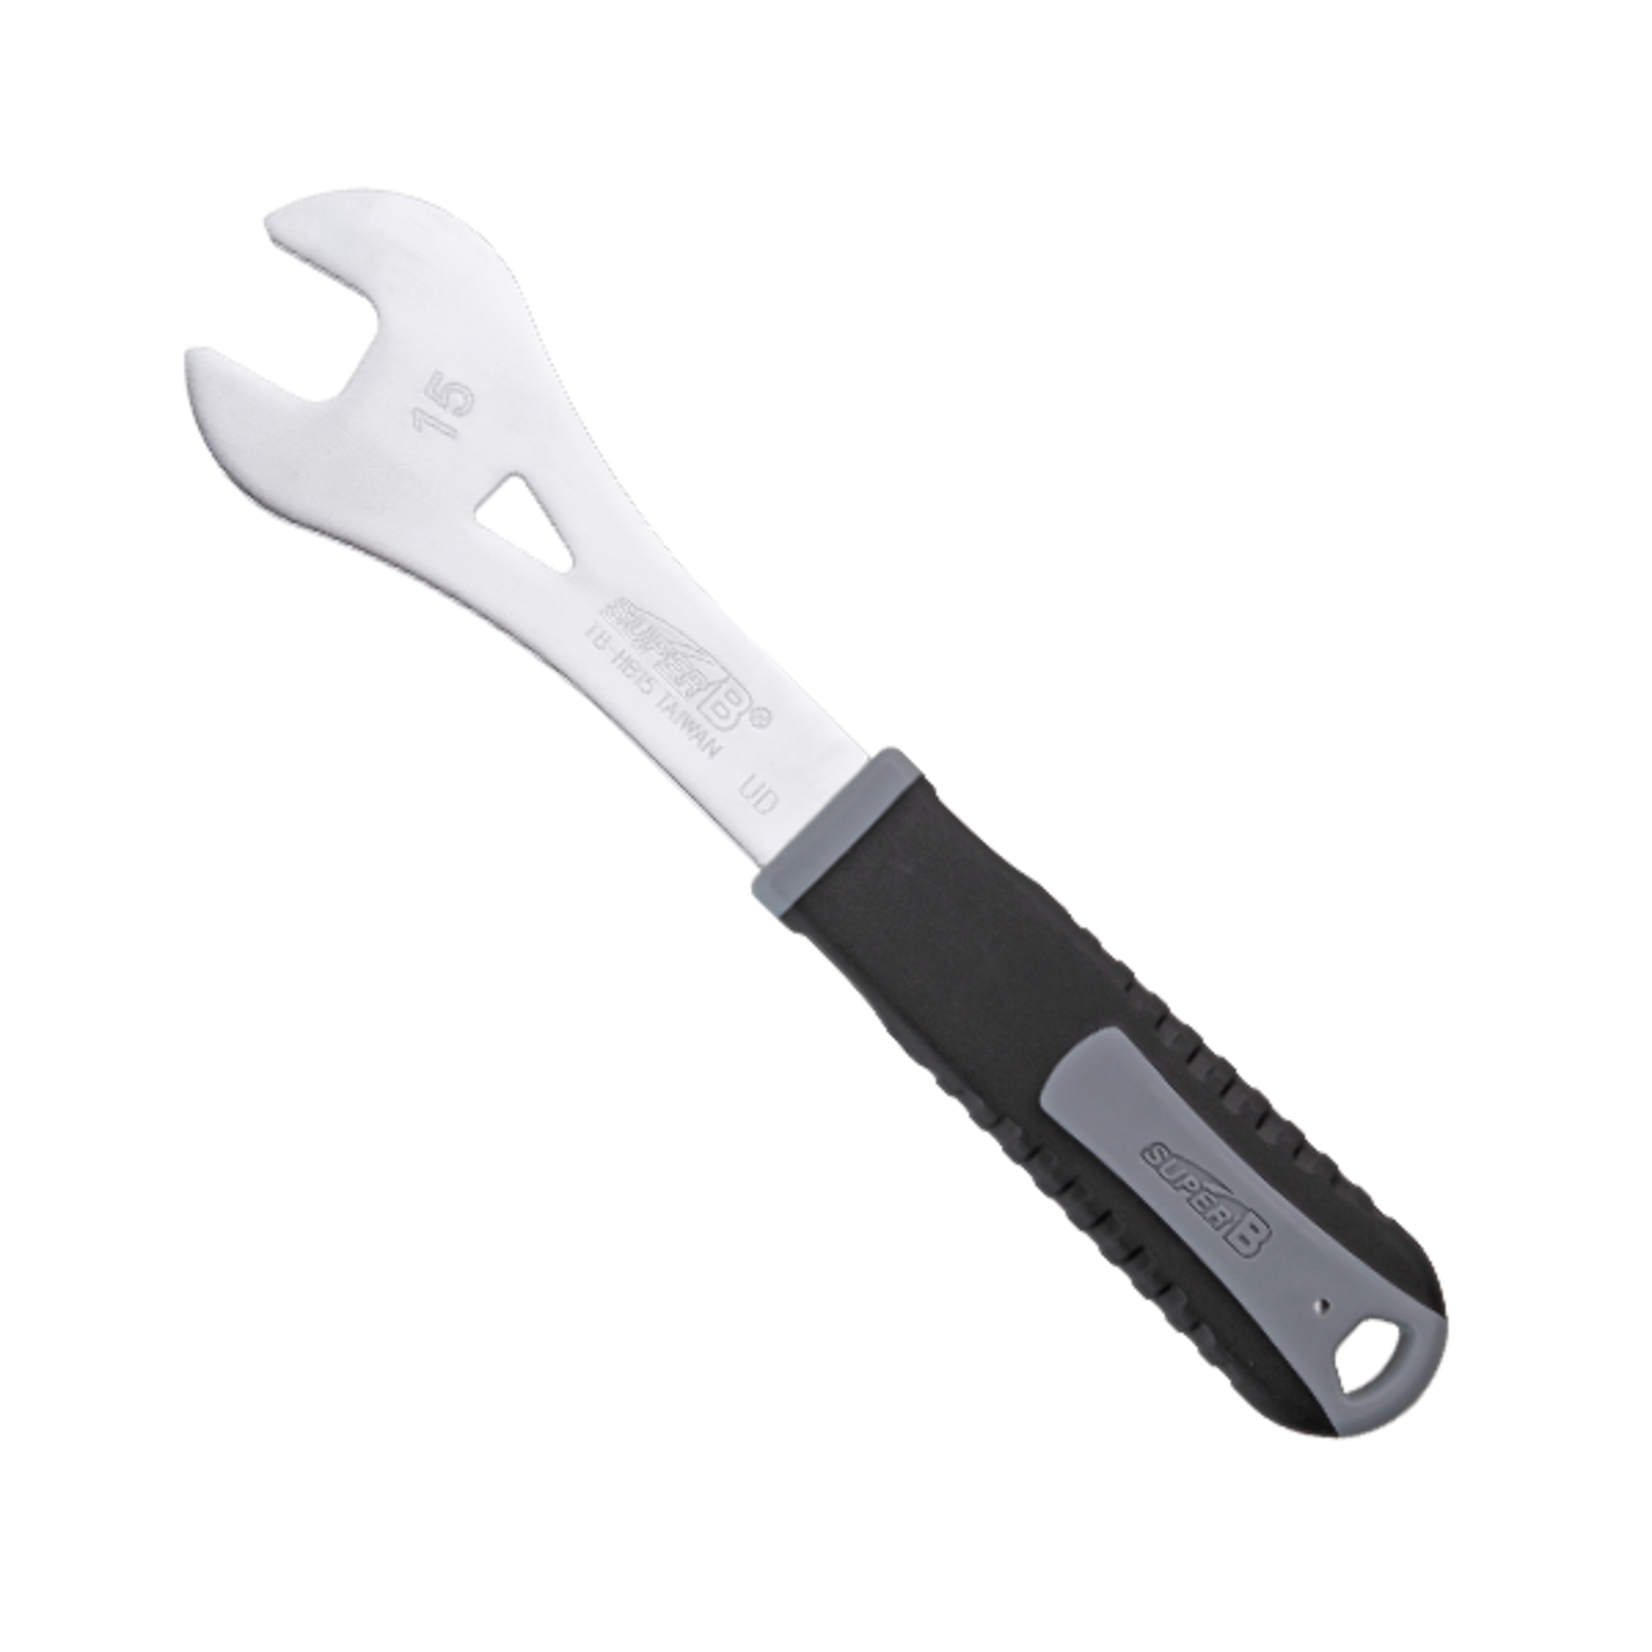 SUPERB TOOLS Super B Cone Wrench